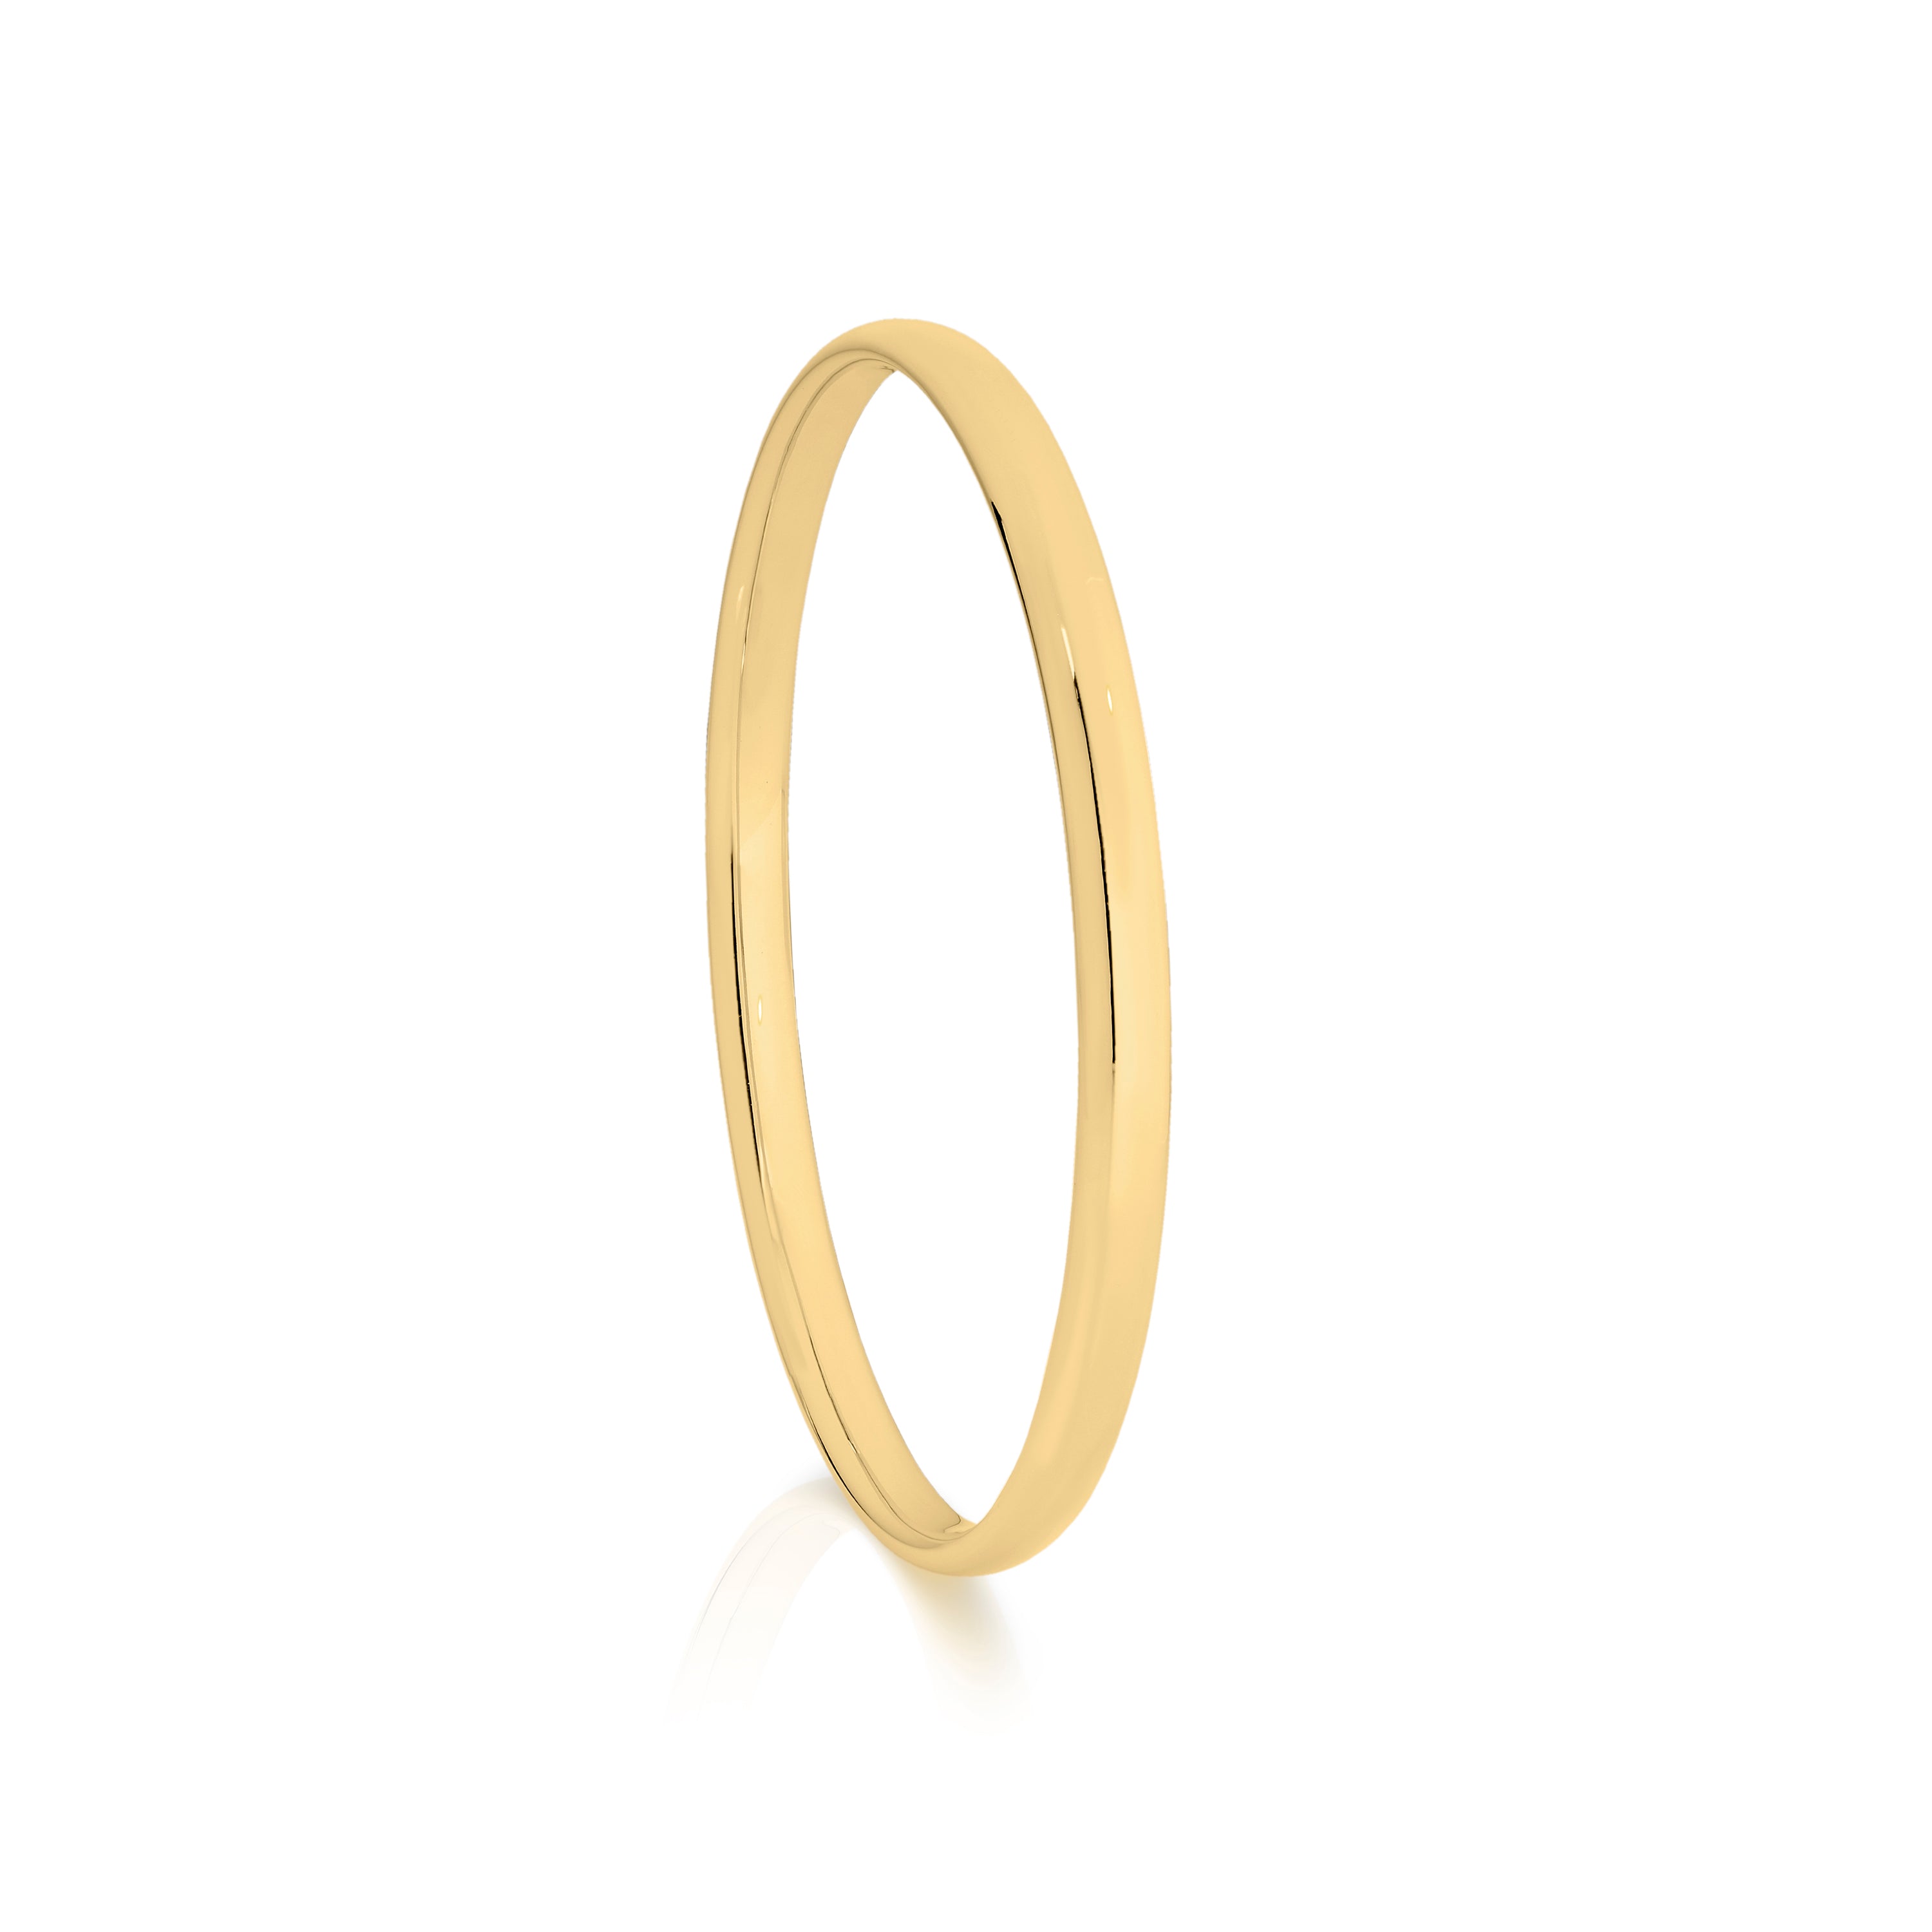 9ct gold 5mm oval bangle